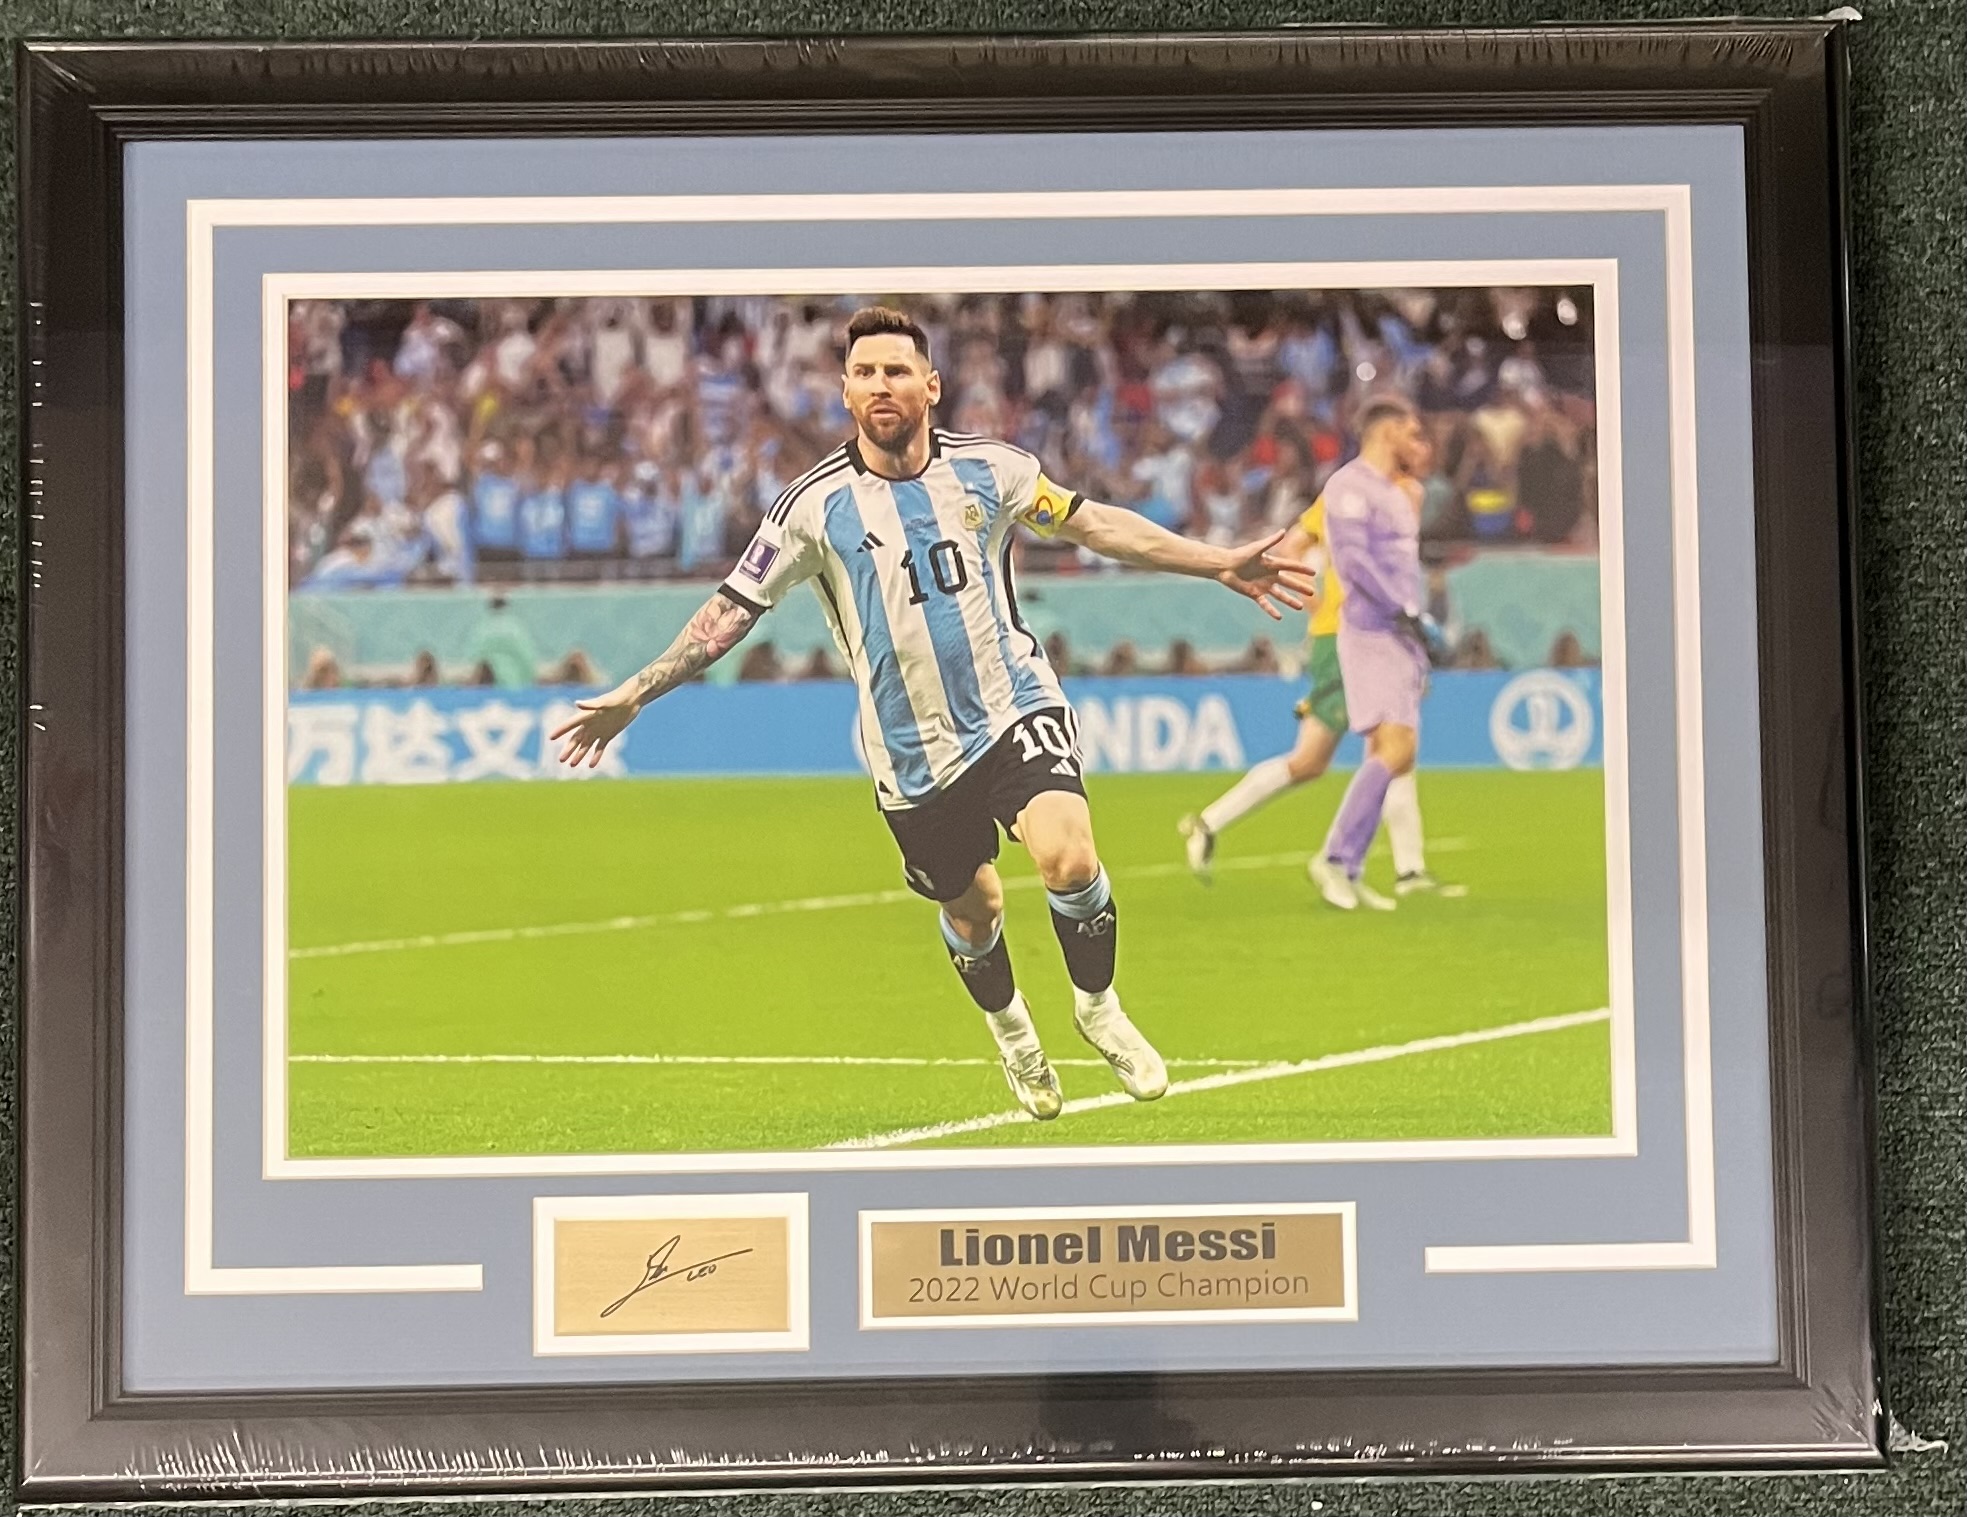 Lionel Messi Signed 2022 World Cup Photo